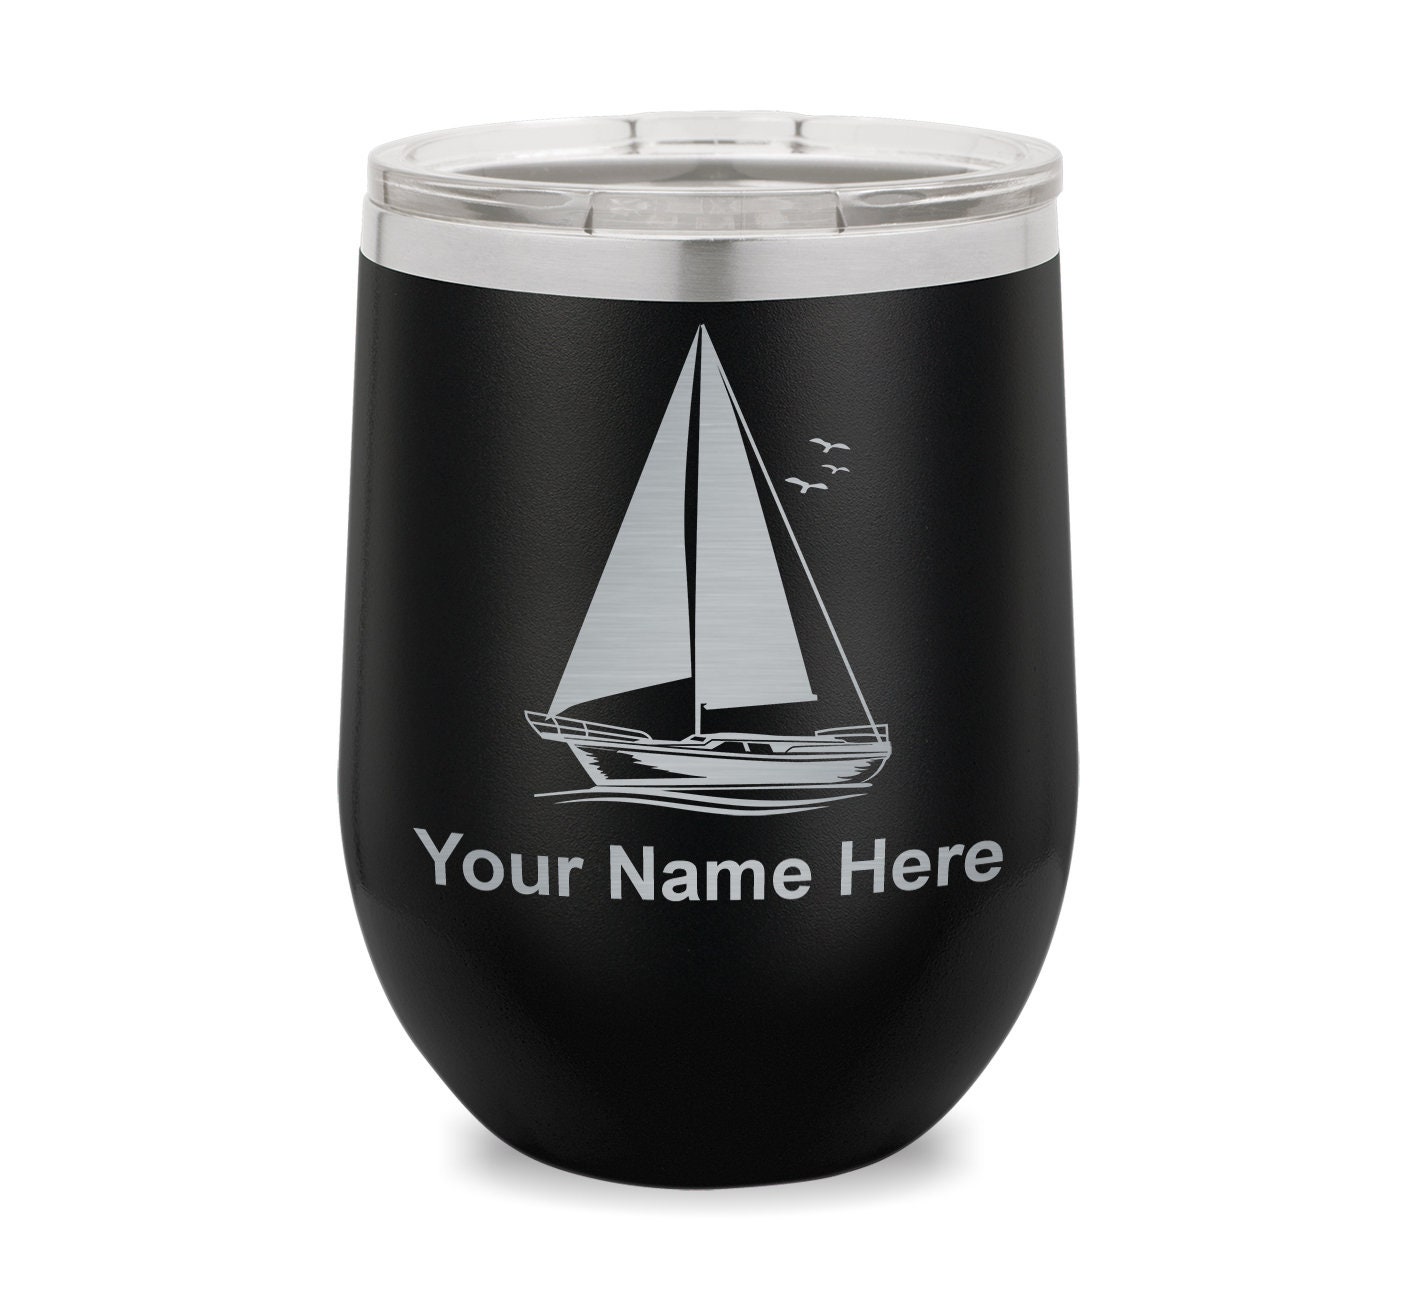 Sailing With Wine Tumbler – Somewhere On A Yacht